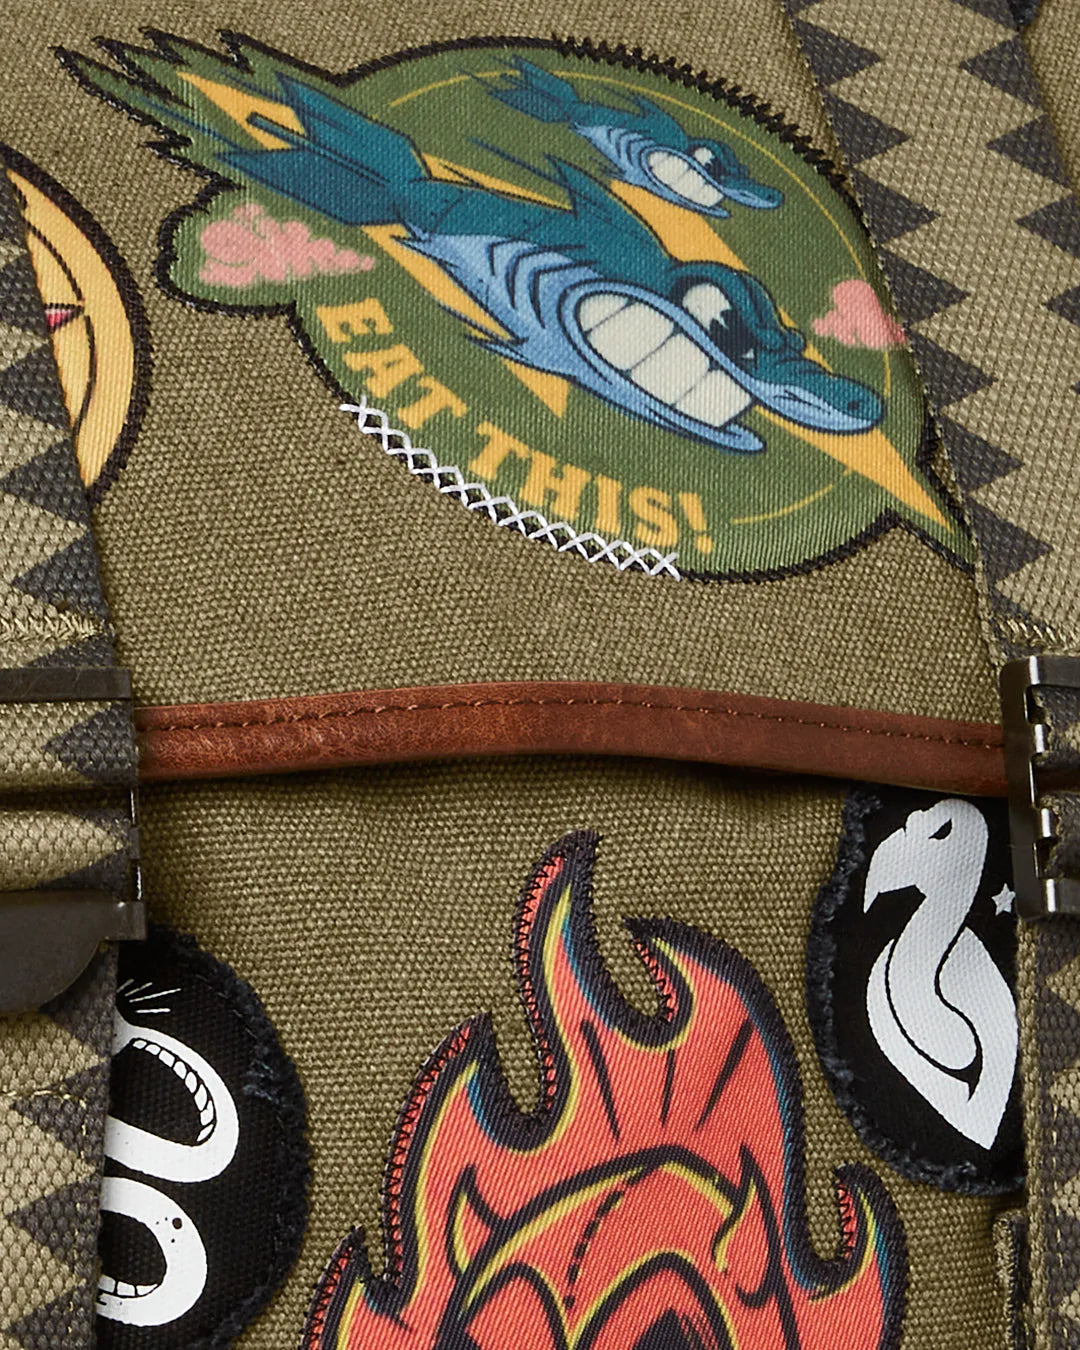 CALL OF DUTY PATCHES MONTE CARLO BACKPACK